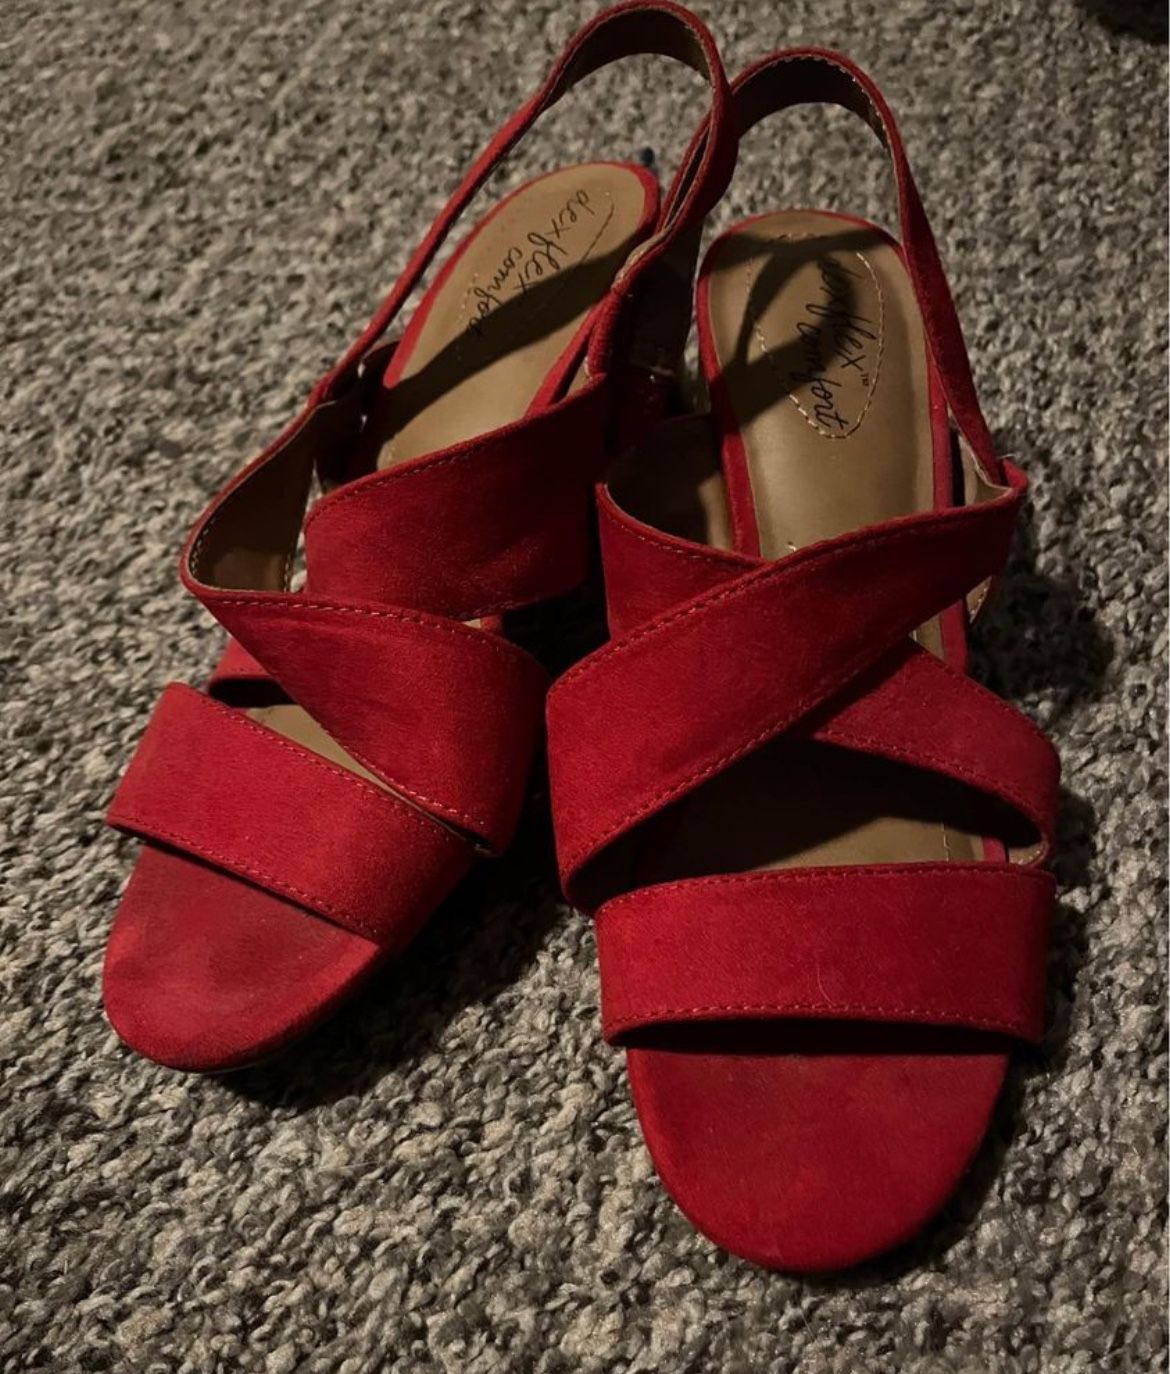 Women’s Red Heeled Sandals Size 8